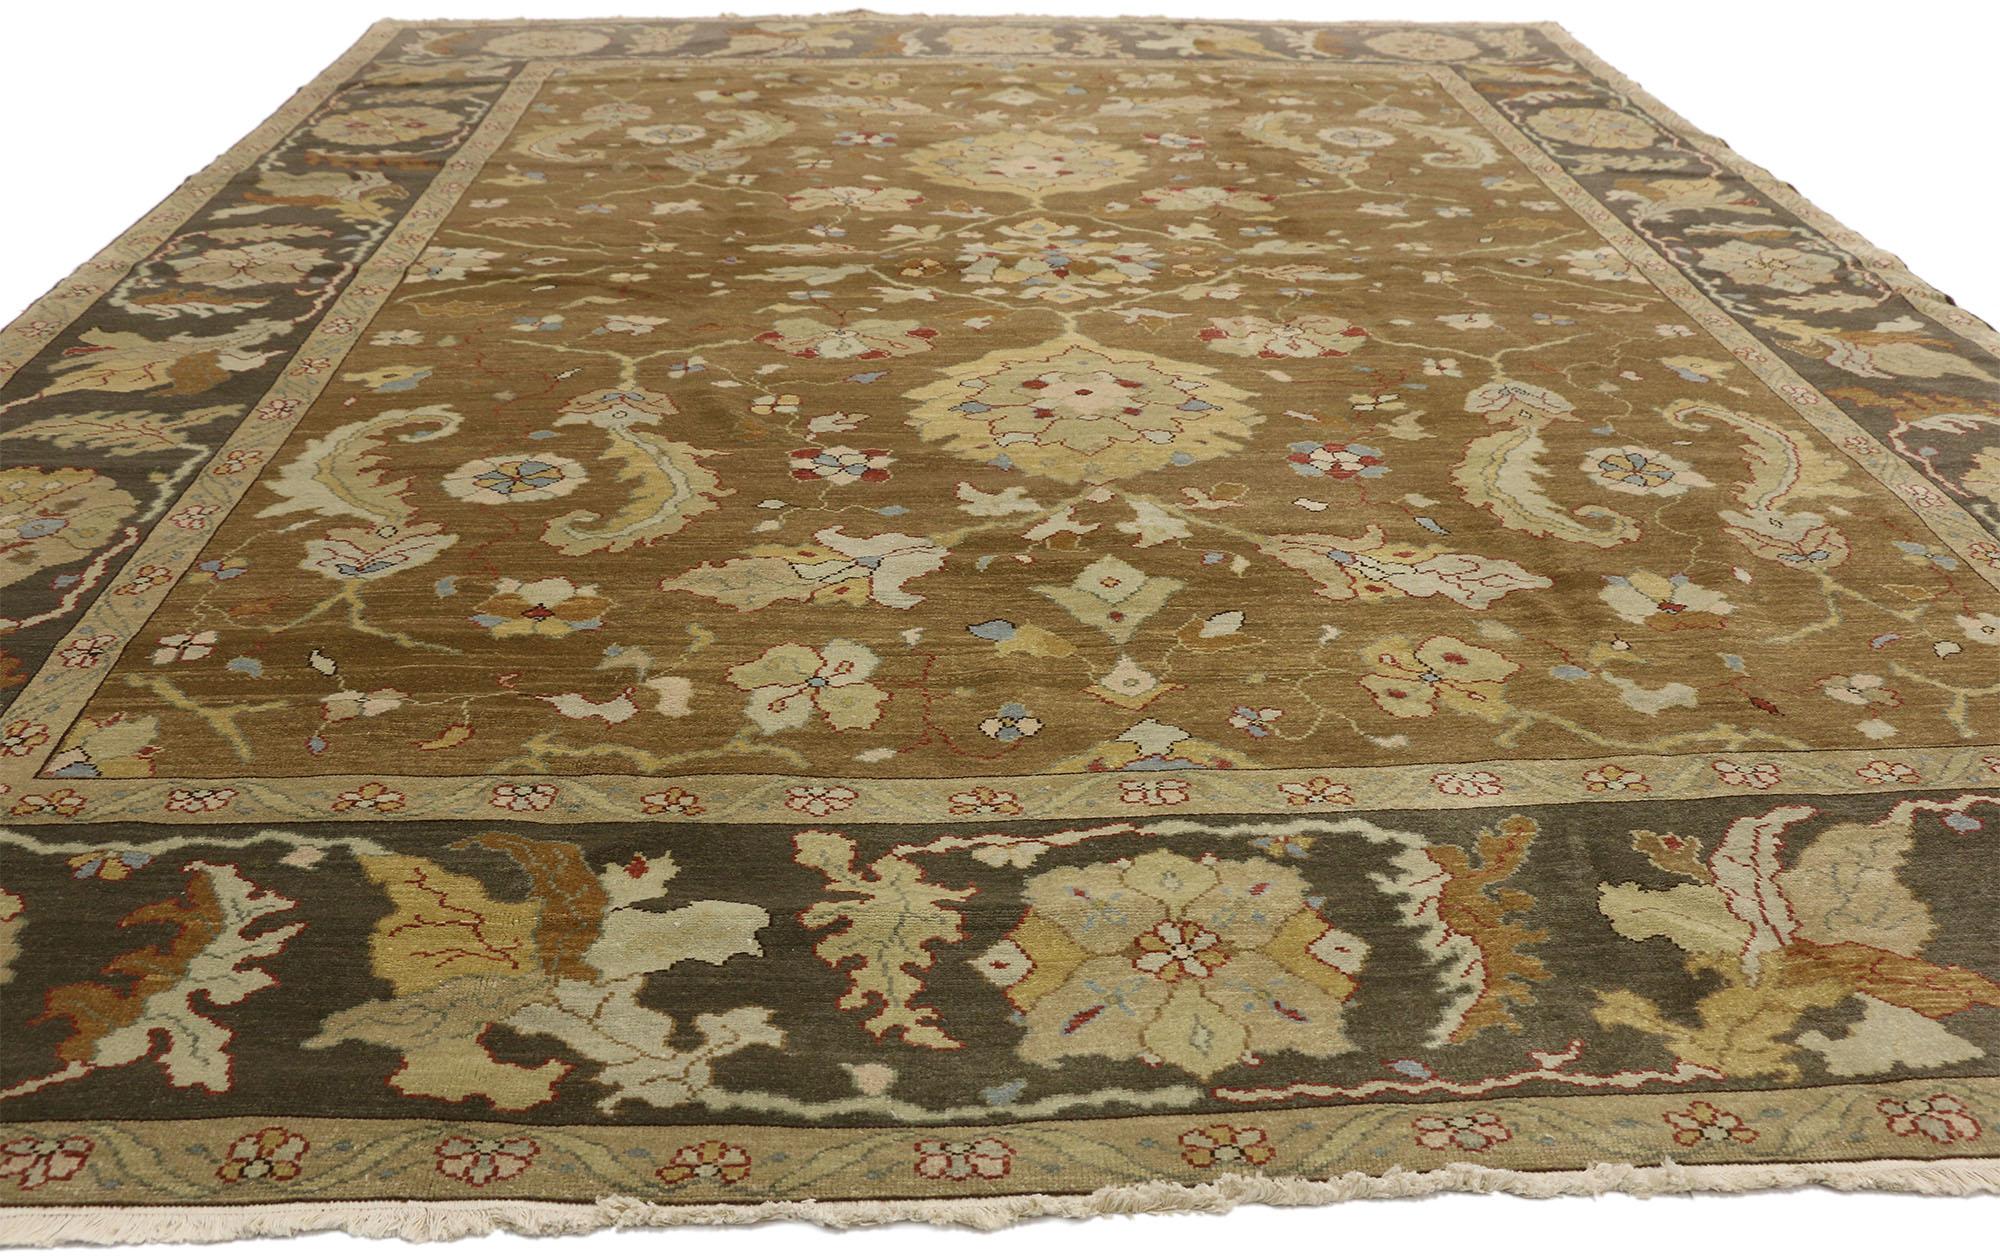 20th Century Vintage Turkish Oushak Area Rug with Modern Style in Warm Colors For Sale